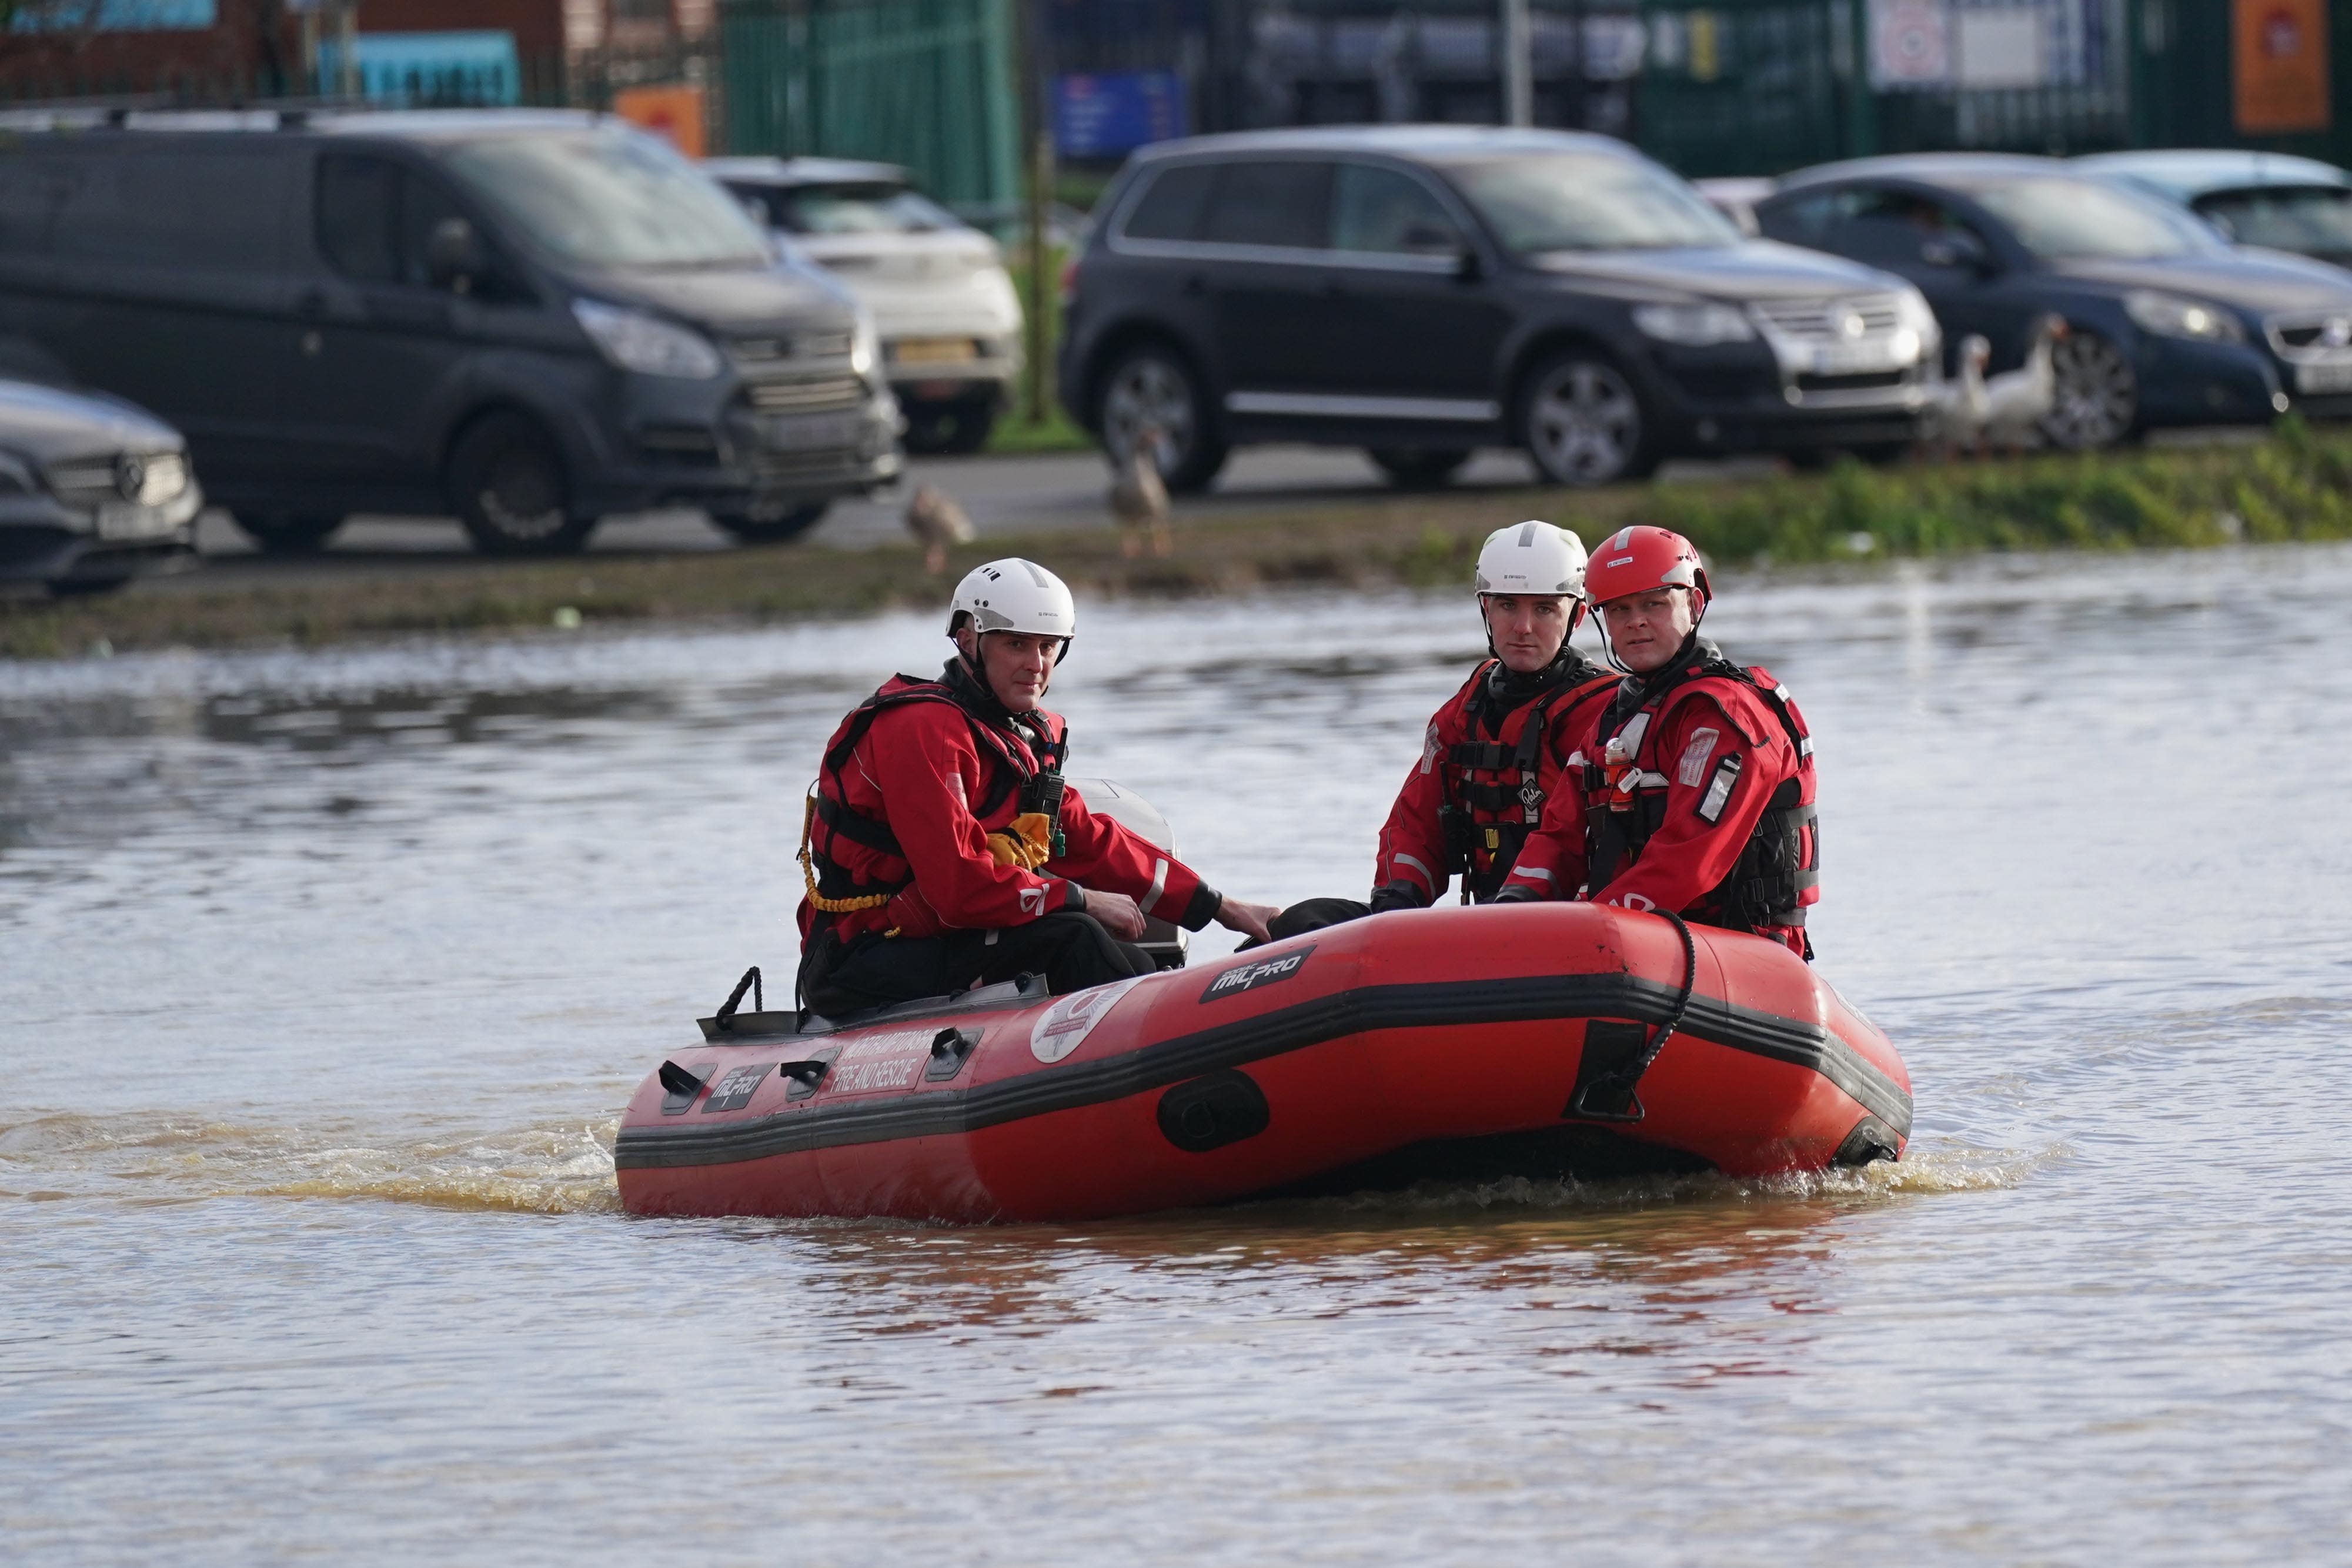 Northamptonshire Fire and rescue service at the Billing Aquadrome in Northampton (Jacob King/PA)